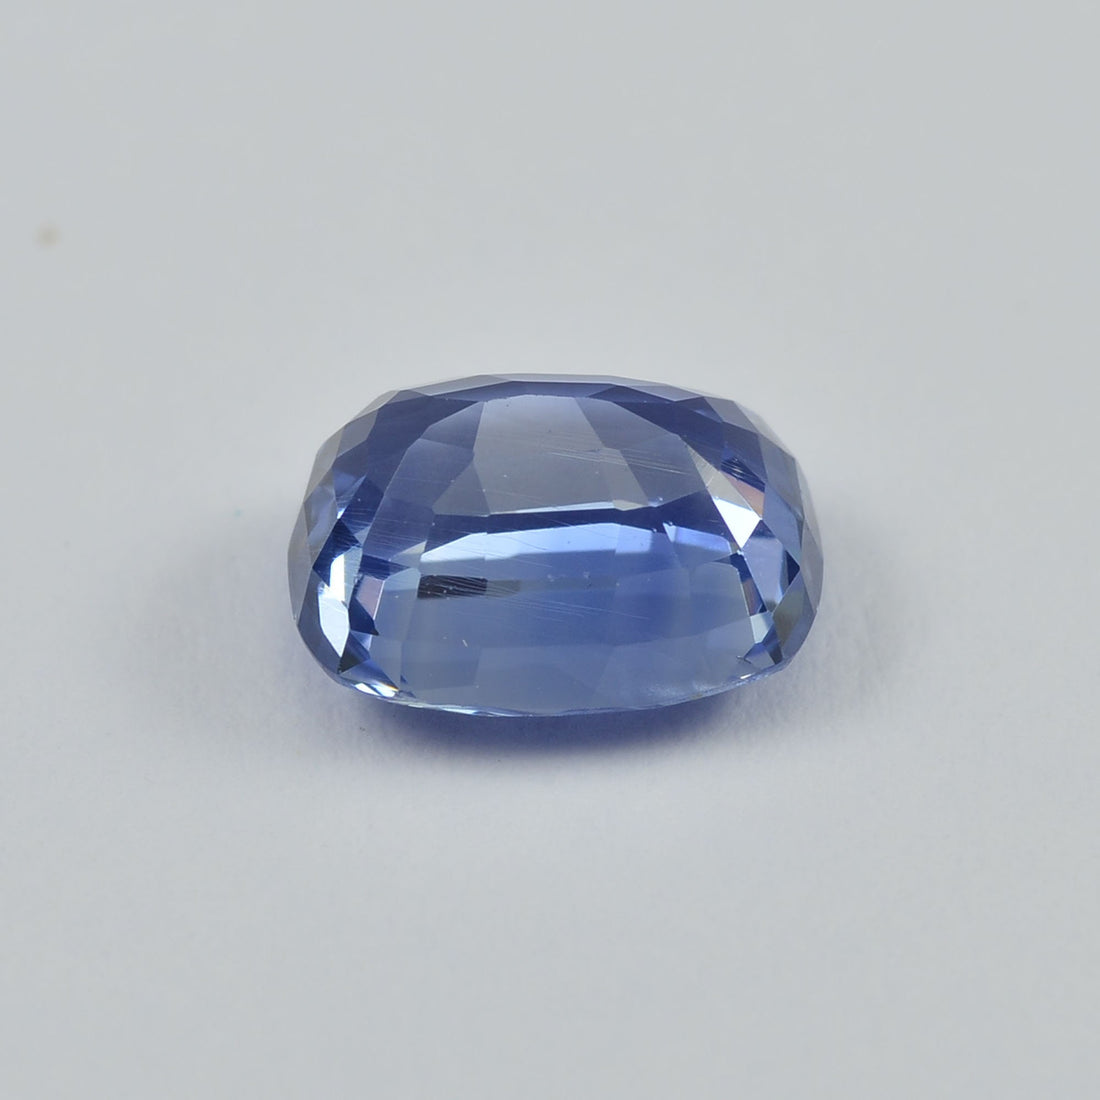 1.74 cts Unheated Natural Blue Sapphire Loose Gemstone Cushion Cut Certified